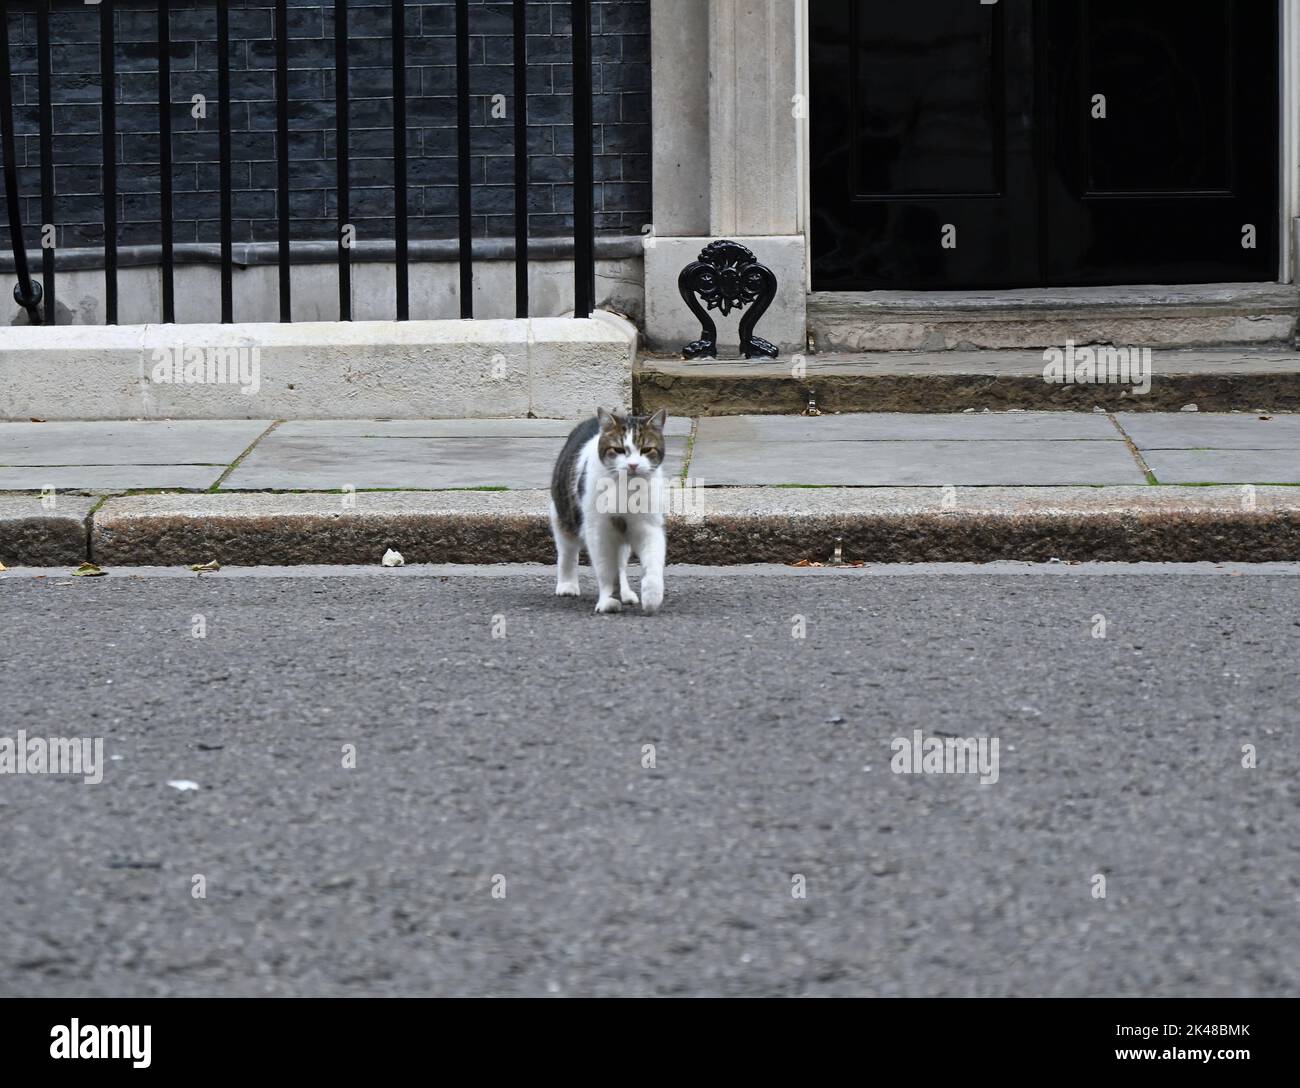 Larry is a rescued stray cat from the Battersea Dogs & Cats Home who was chosen by Downing Street staff.Larry was intended to be a pet for the children of David and Samantha Cameron, and was described by Downing Street sources as a good ratter and as having a high chase-drive and hunting instinct'. In 2012, Battersea Dogs & Cats Home revealed that Larry's popularity had resulted in a 15 percent surge of people adopting cats. Stock Photo